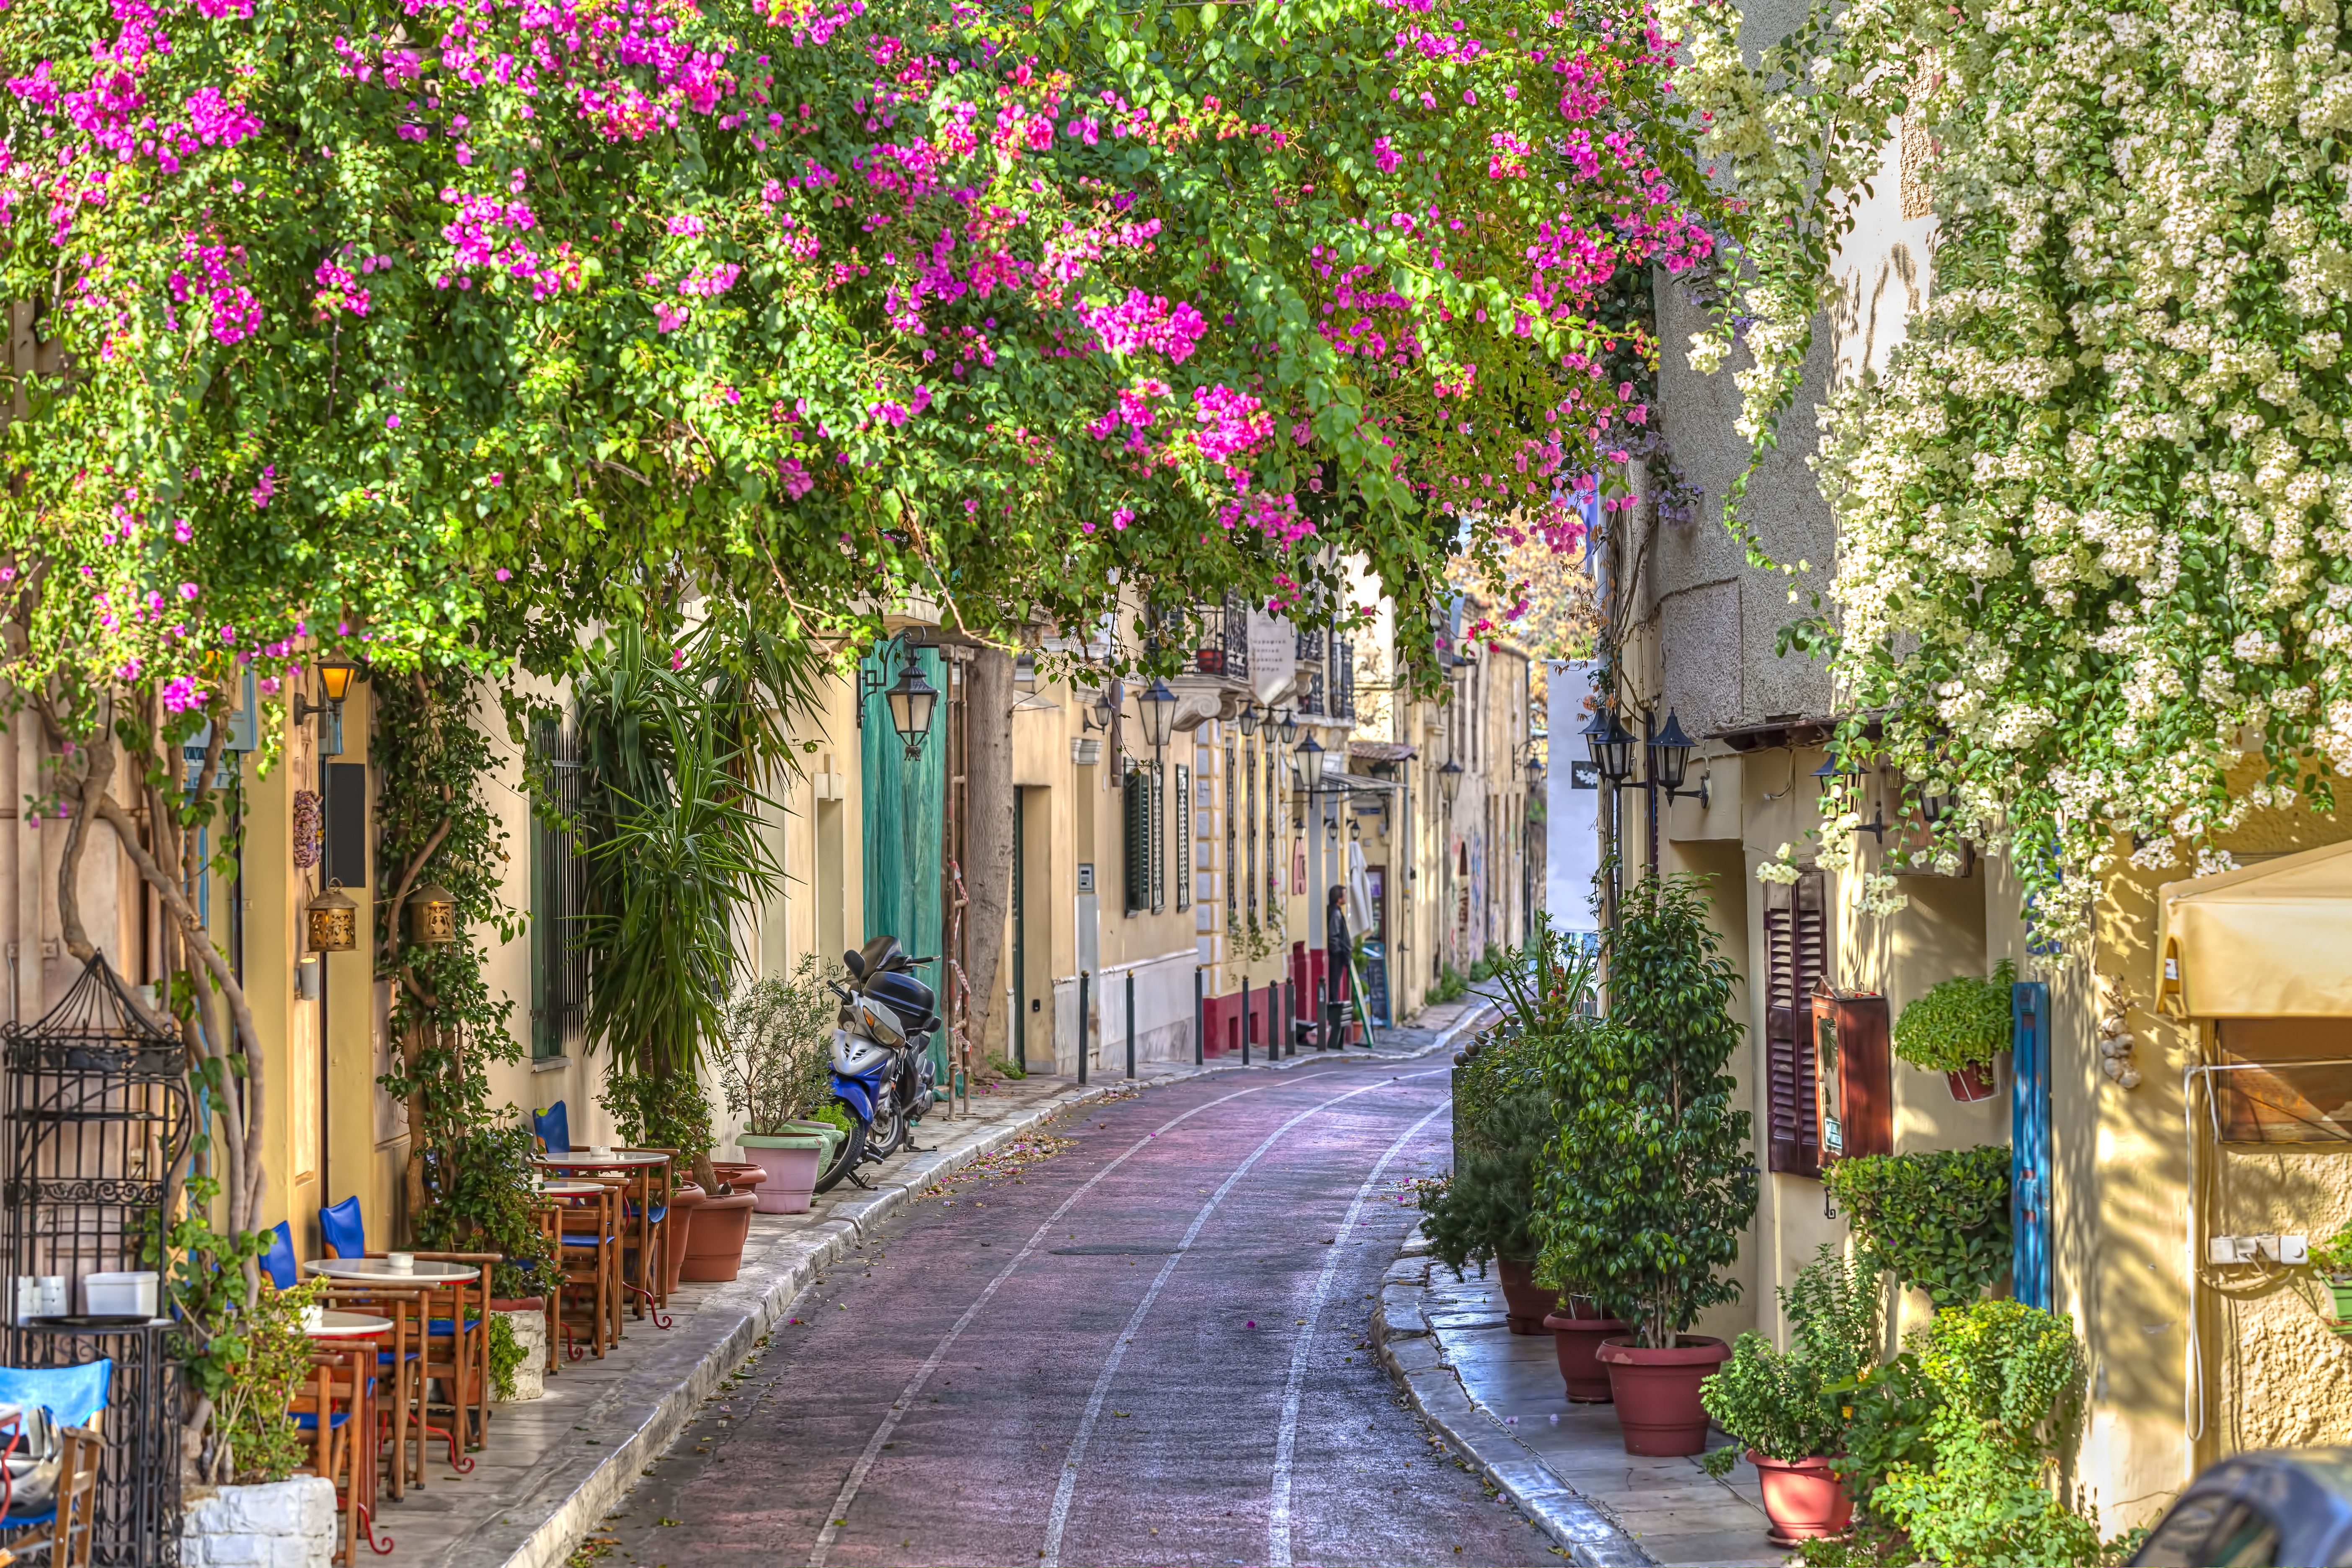 Wallpaper. Spring. photo. picture. Greece, flowers, spring, the city, street